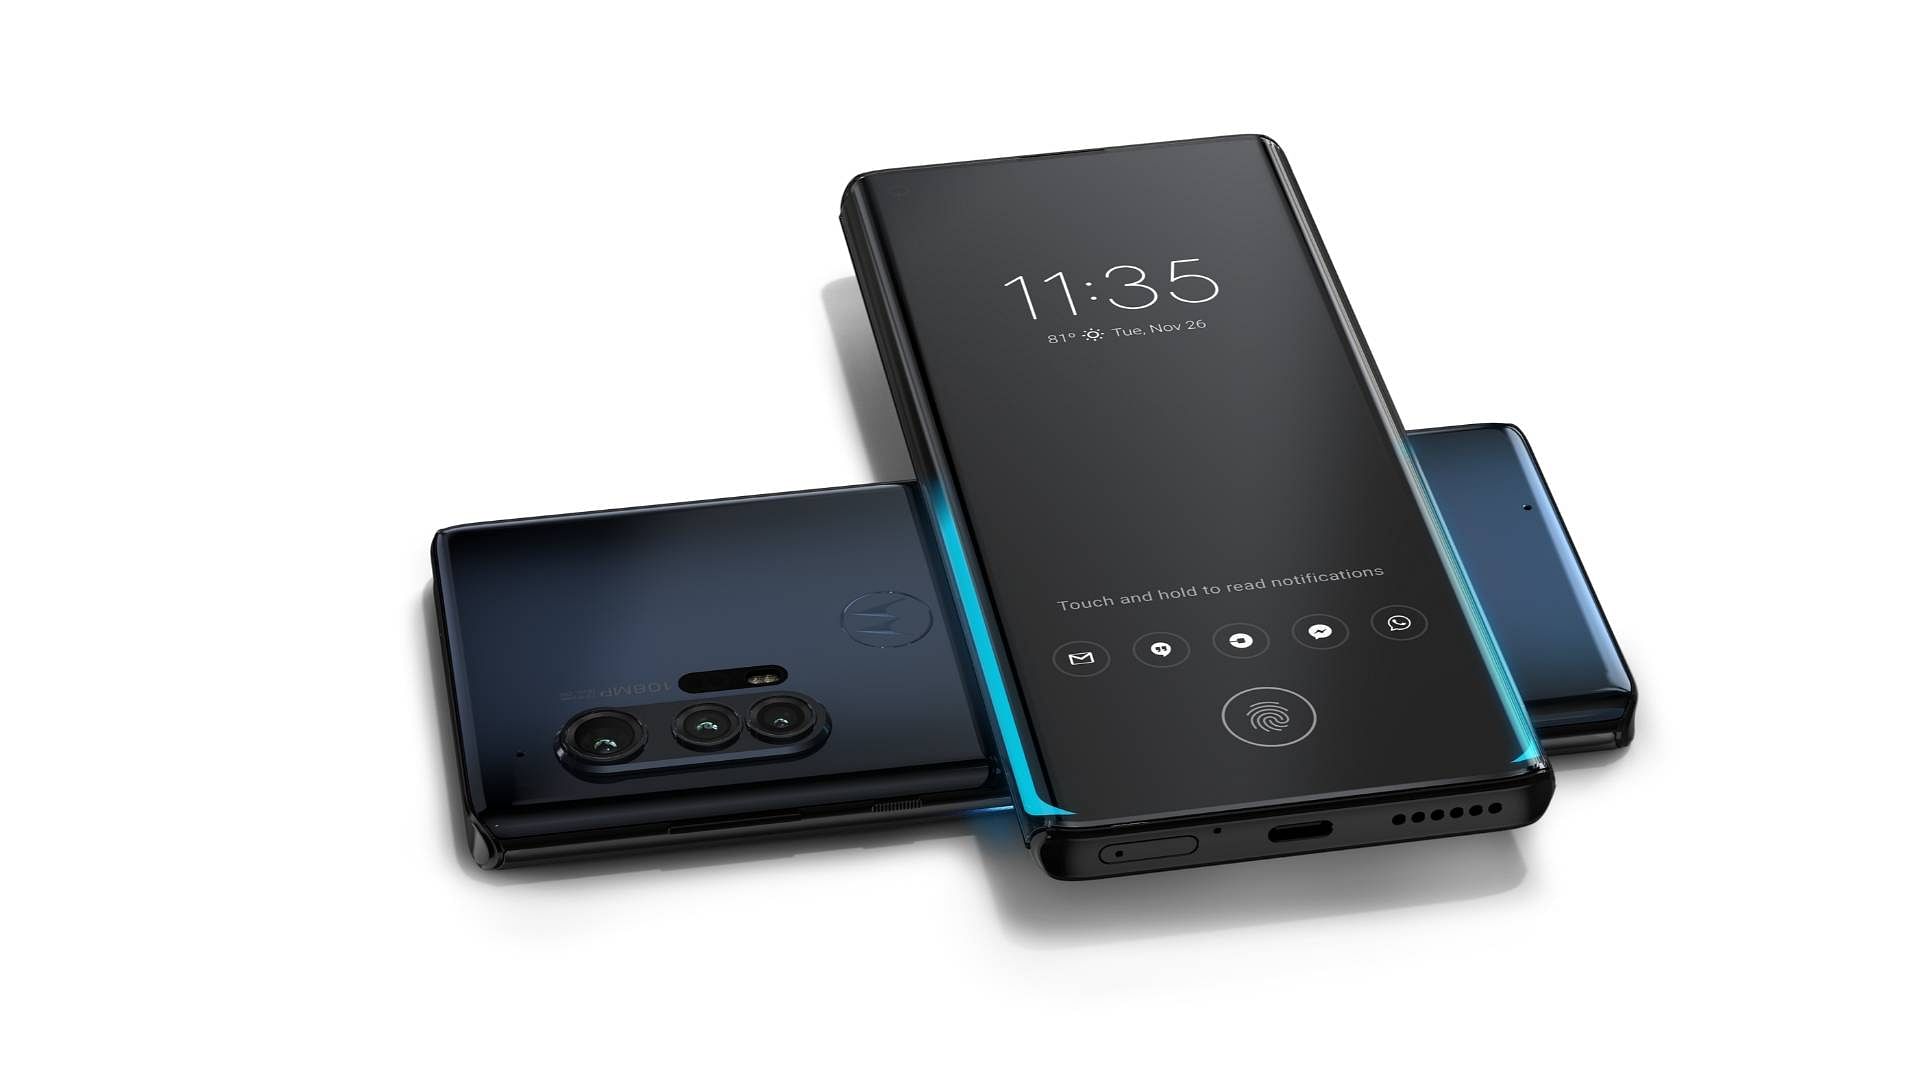 The Edge+ is the true-blue flagship phone of 2020